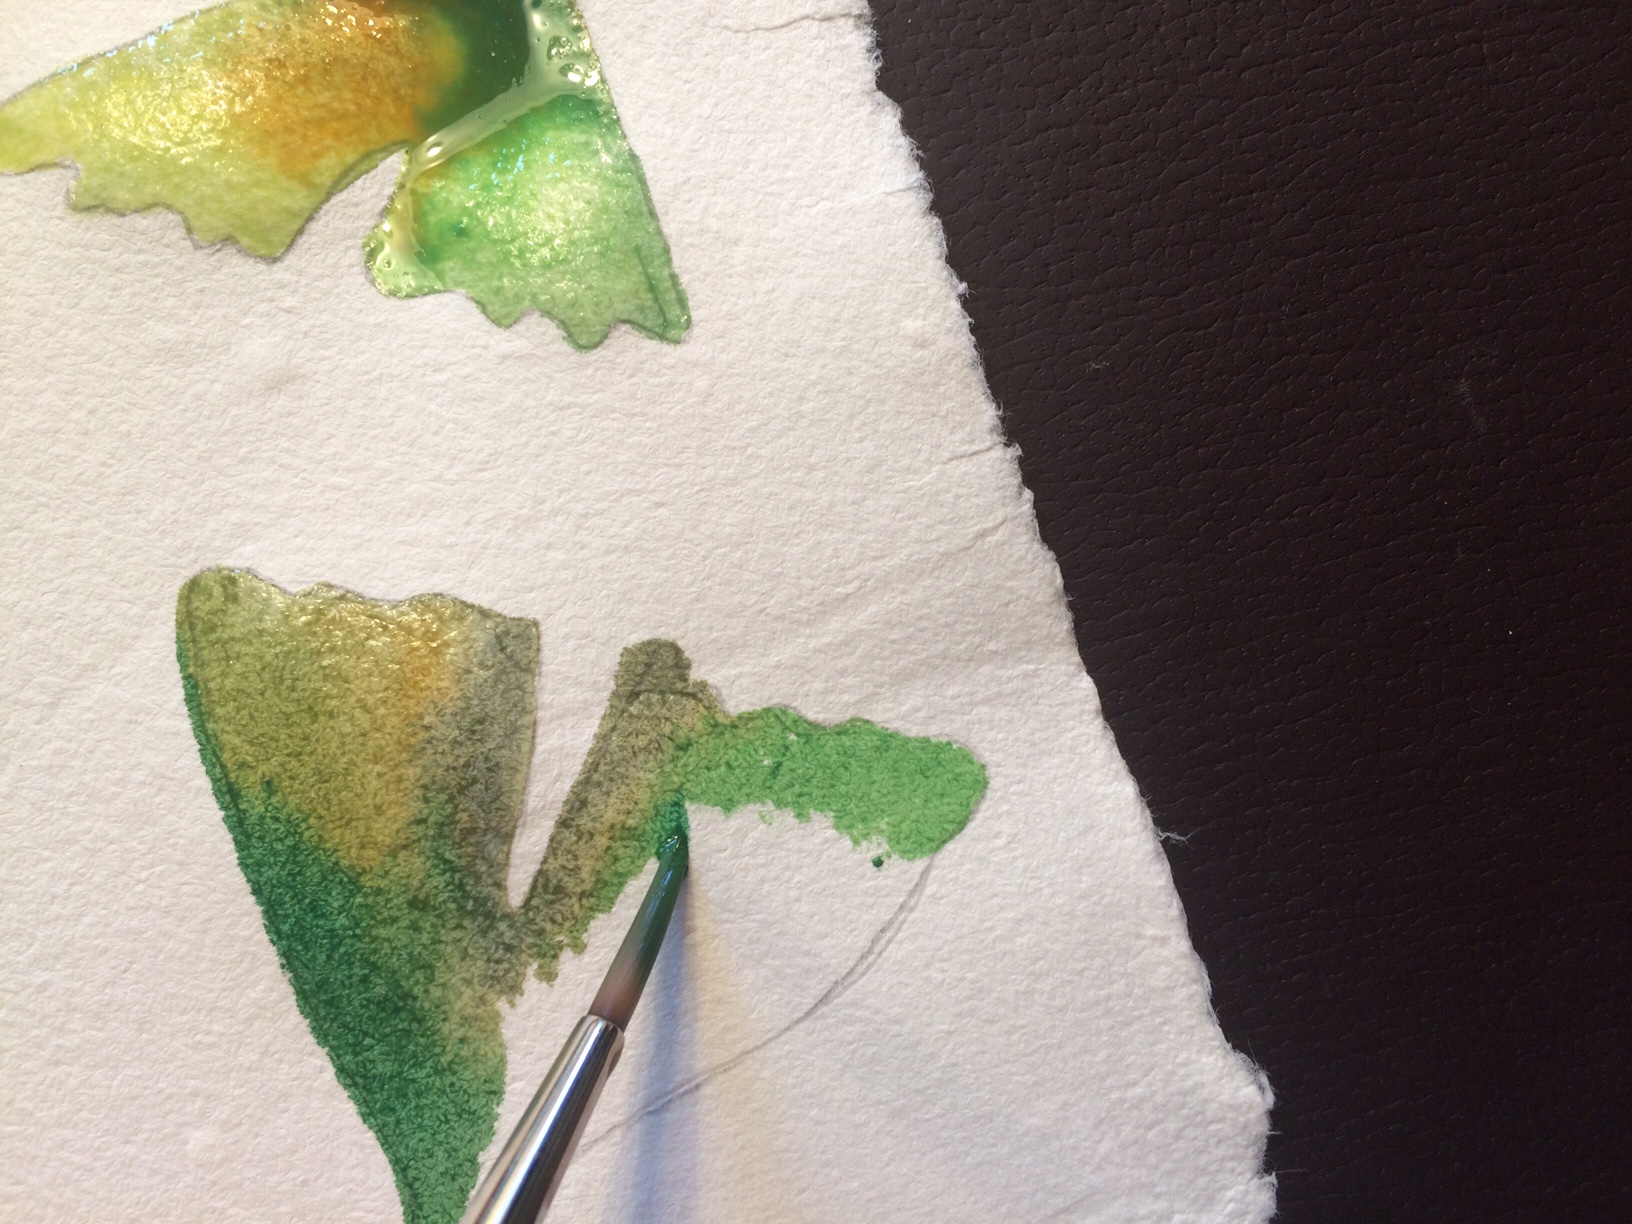 Wet-on-Wet vs Wet-on-Dry Watercolor Painting